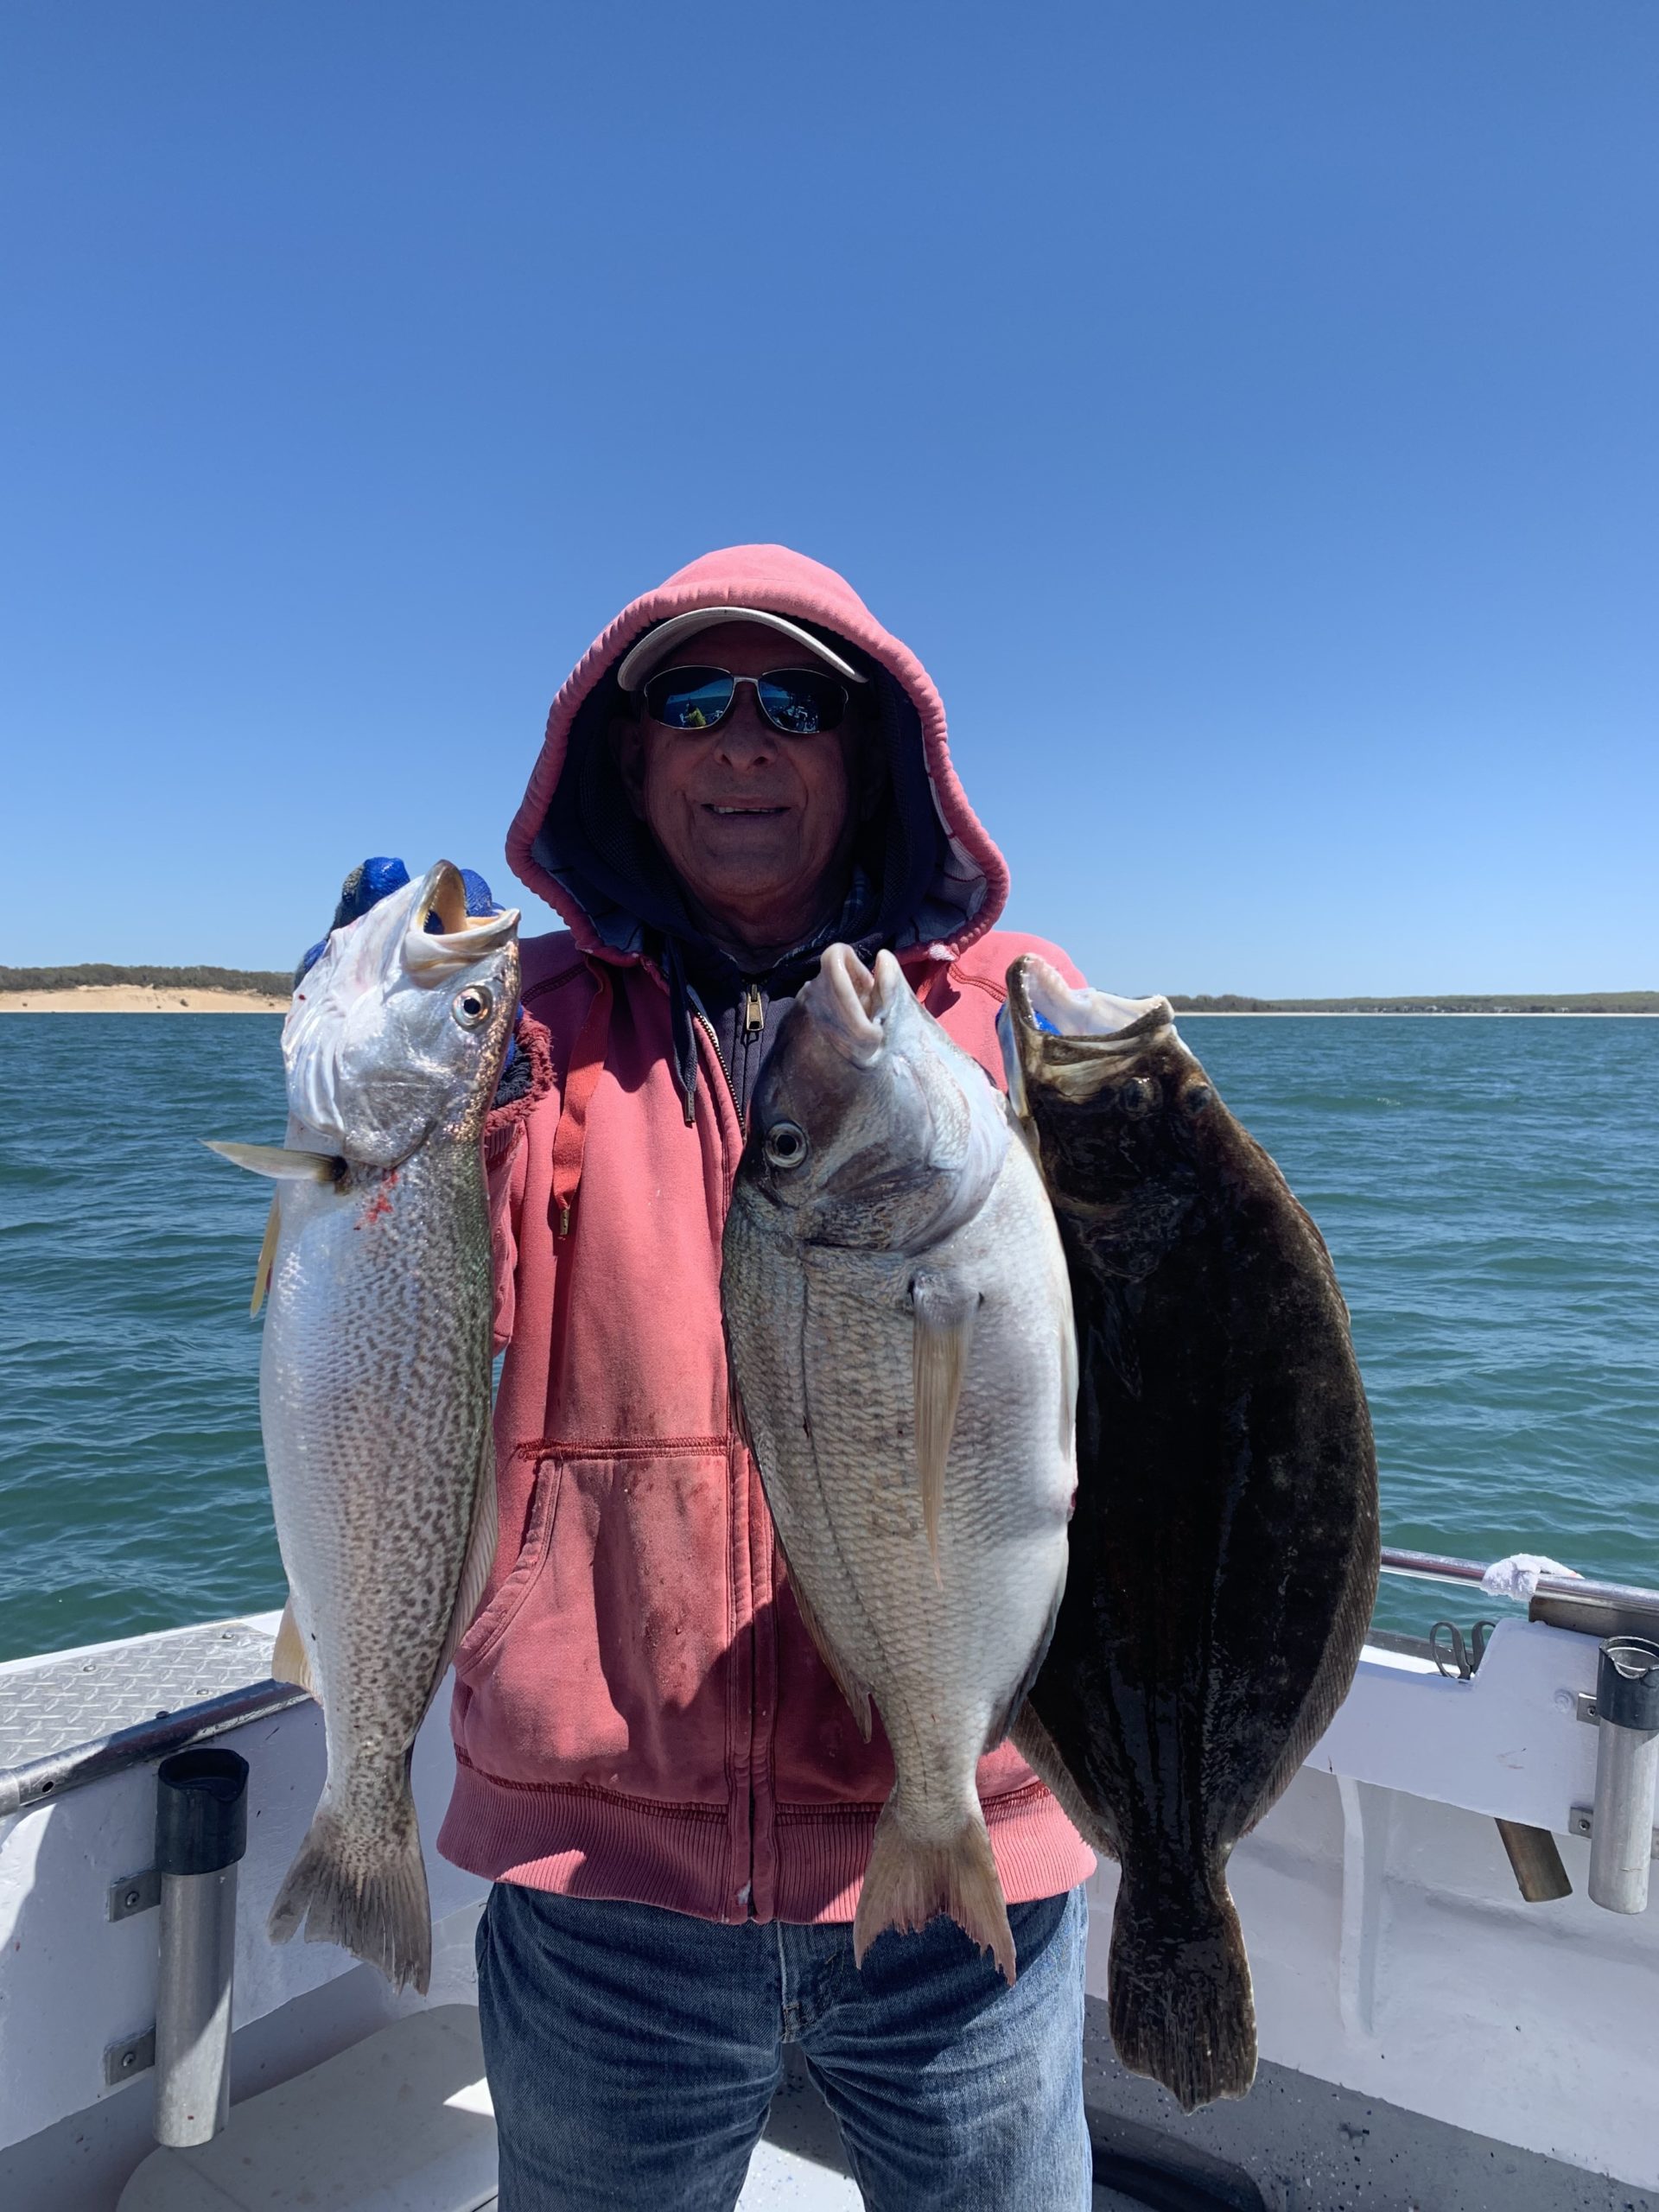 The Peconics have every species of fish you could possibly want to catch in local waters right now. Pino Kos decked this Peconic Bay trifecta aboard the Shinnecock Star over the weekend.